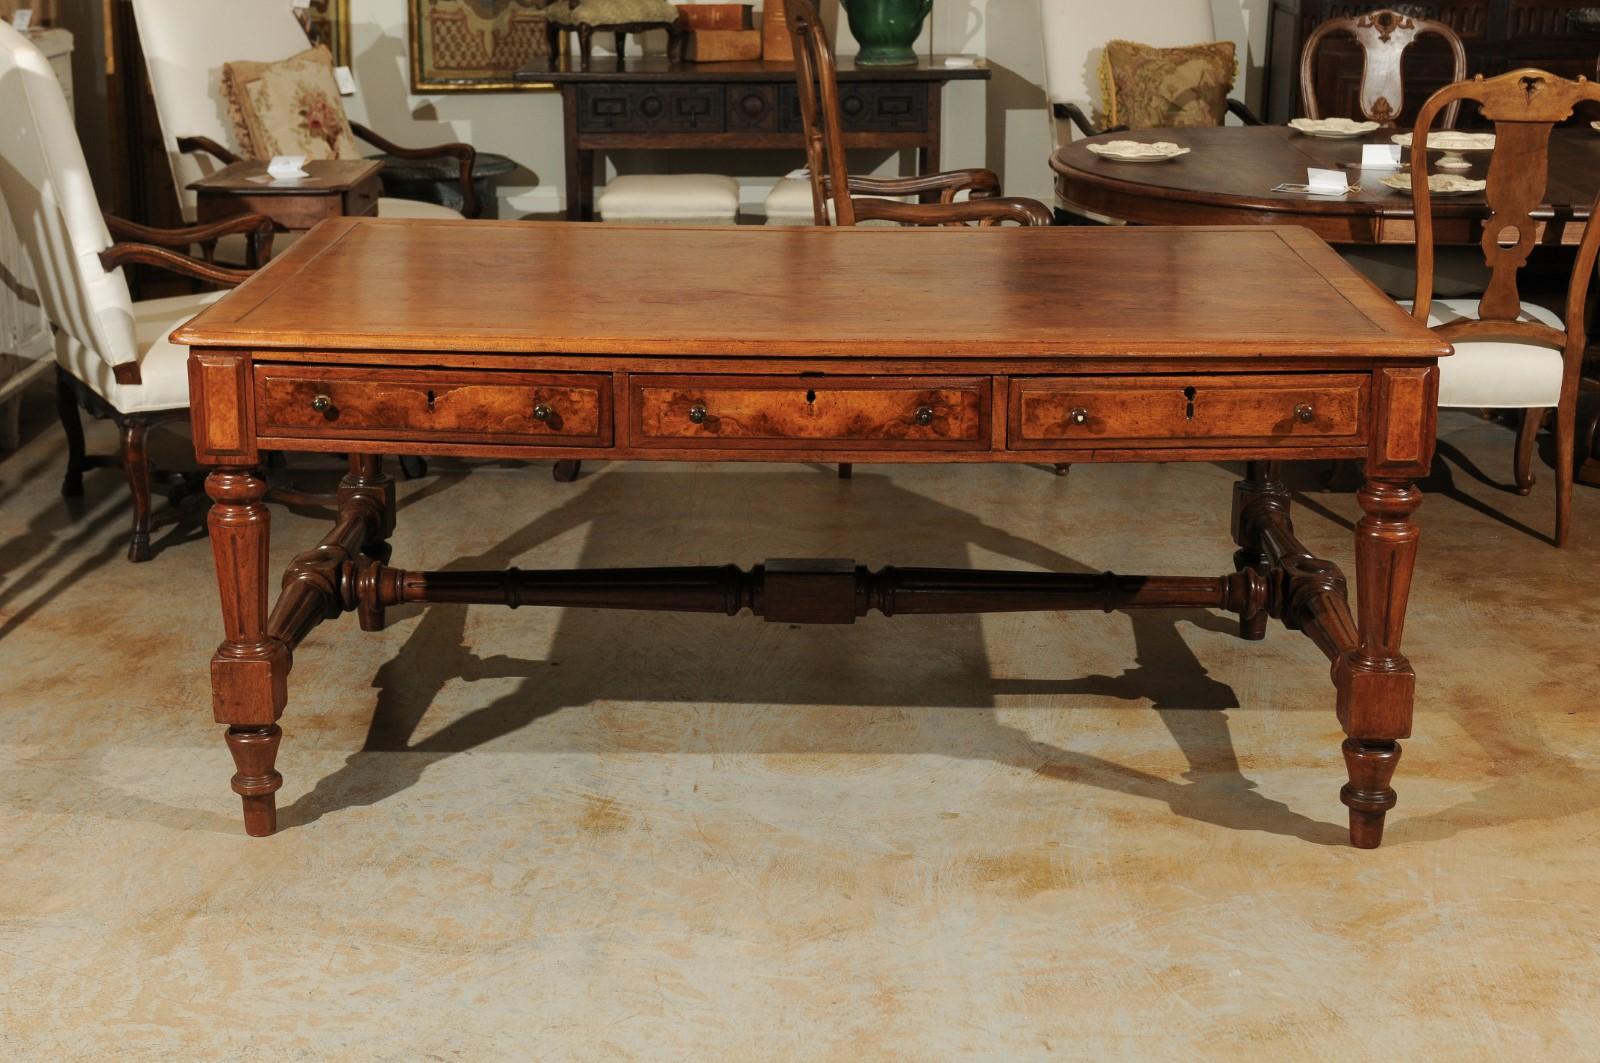 19th Century American Walnut Partners Desk with Six Drawers and Turned Legs 2